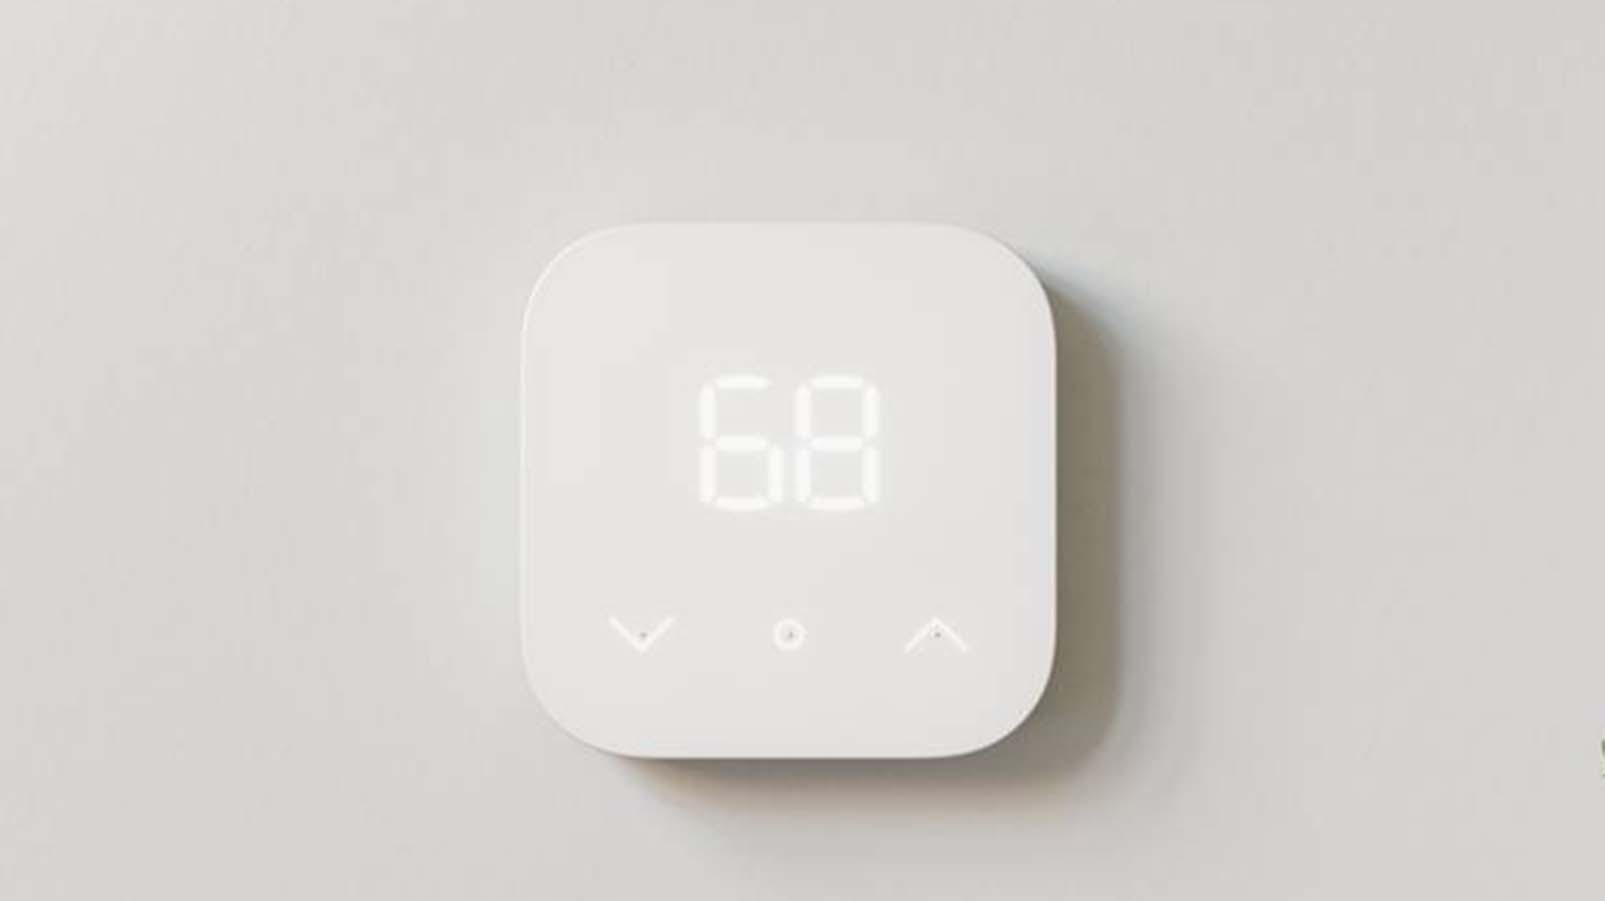 Smart Thermostat review: An excellent $60 thermostat